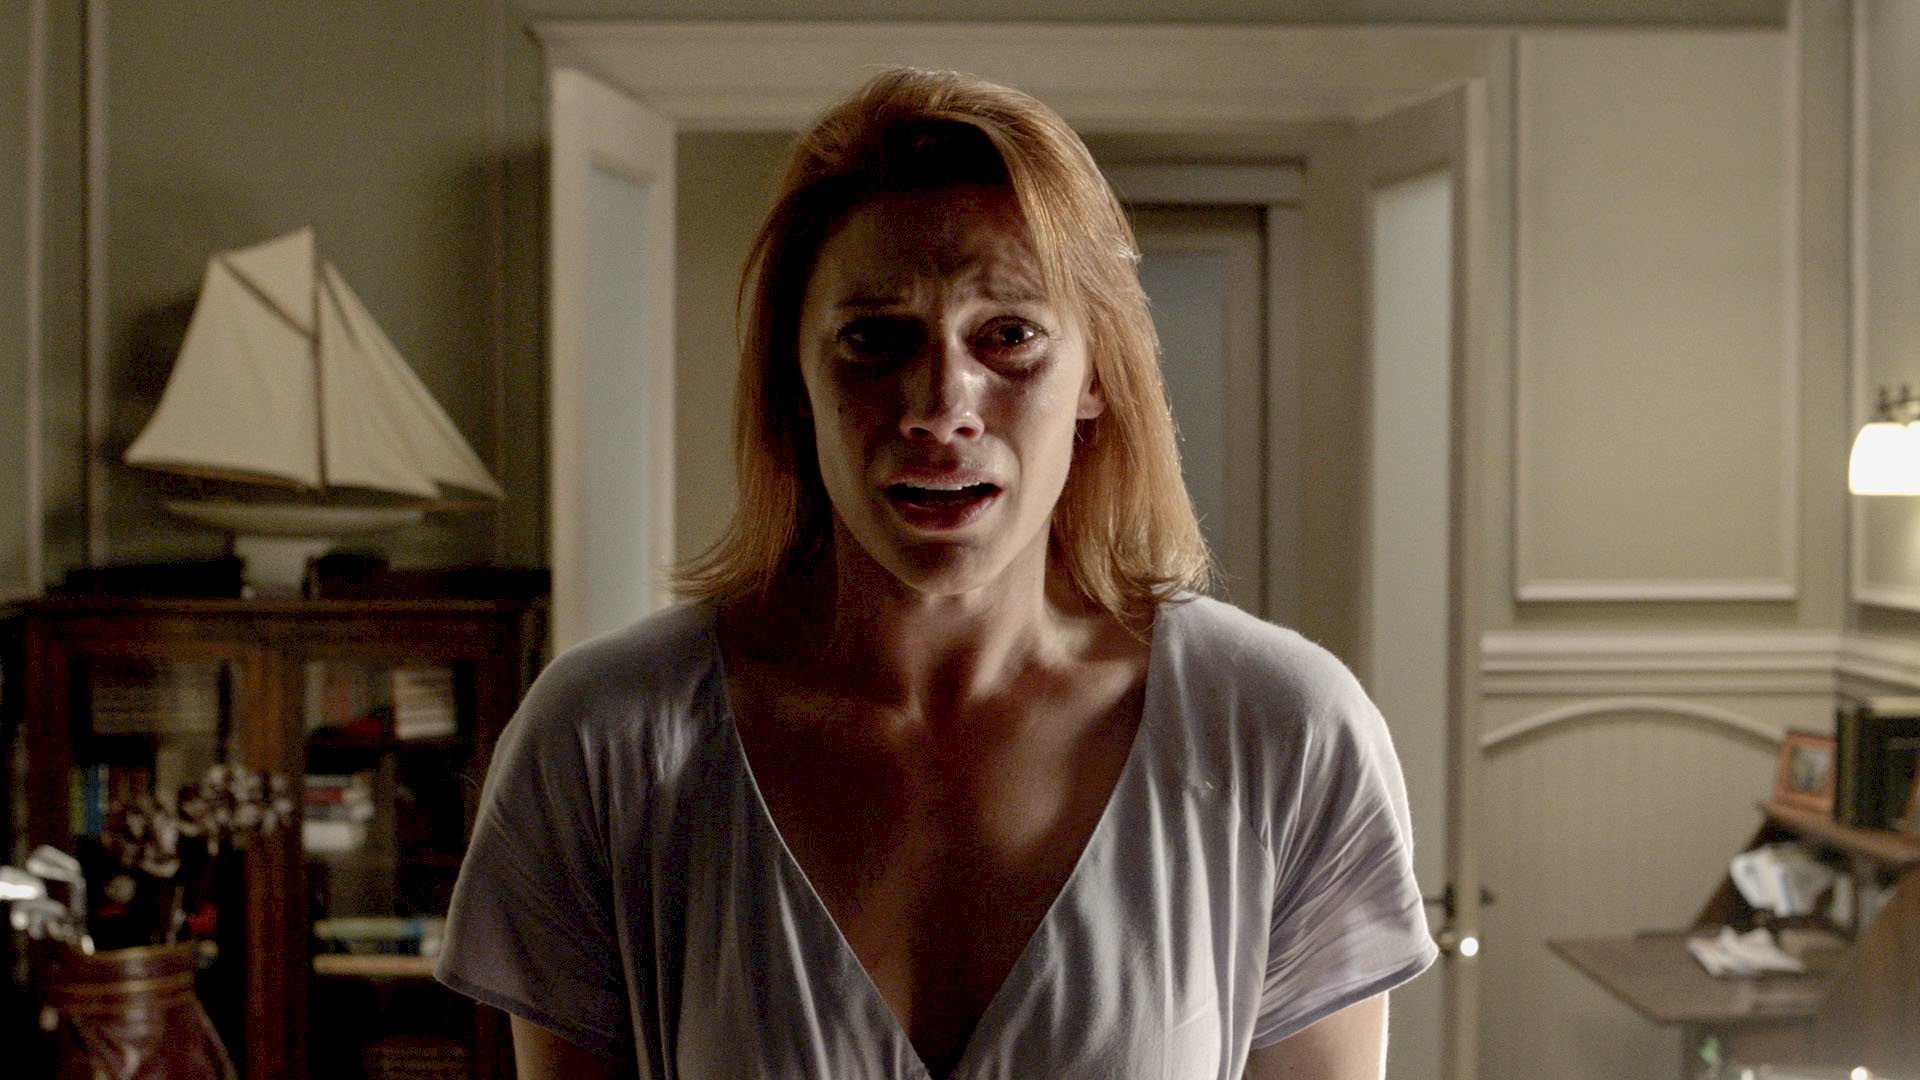 Katee Sackhoff stars as Marie Russell in Relativity Media's Oculus (2014). Photo credit by John Estes.